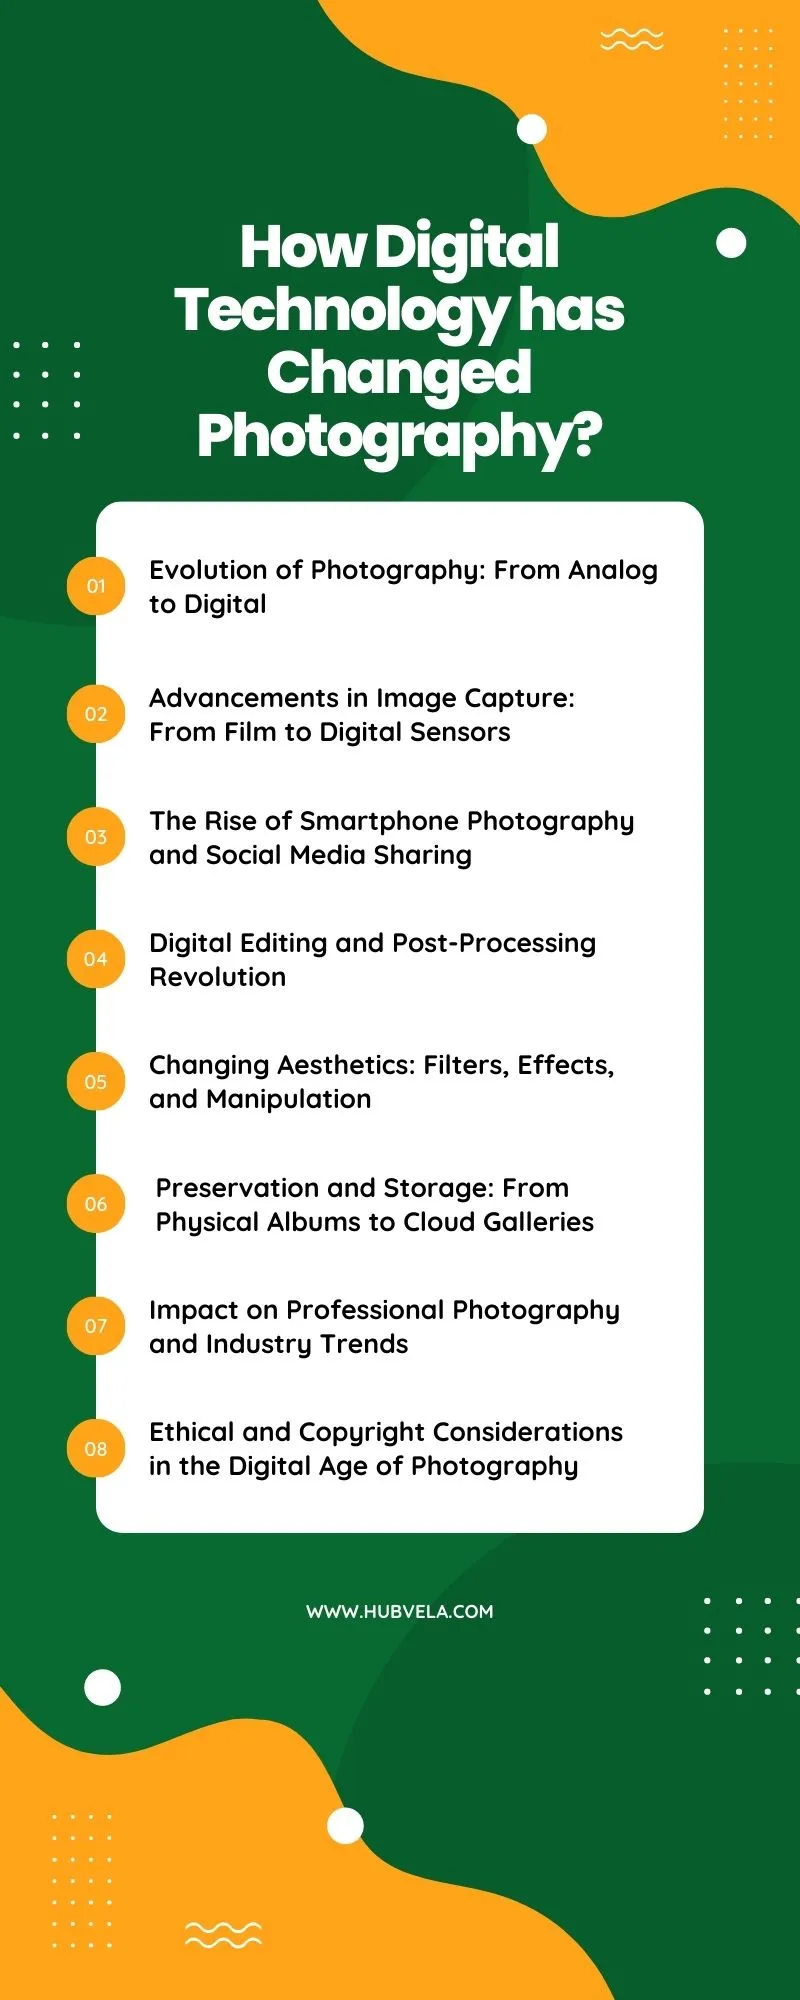 ``How Digital Technology has Changed Photography infographic